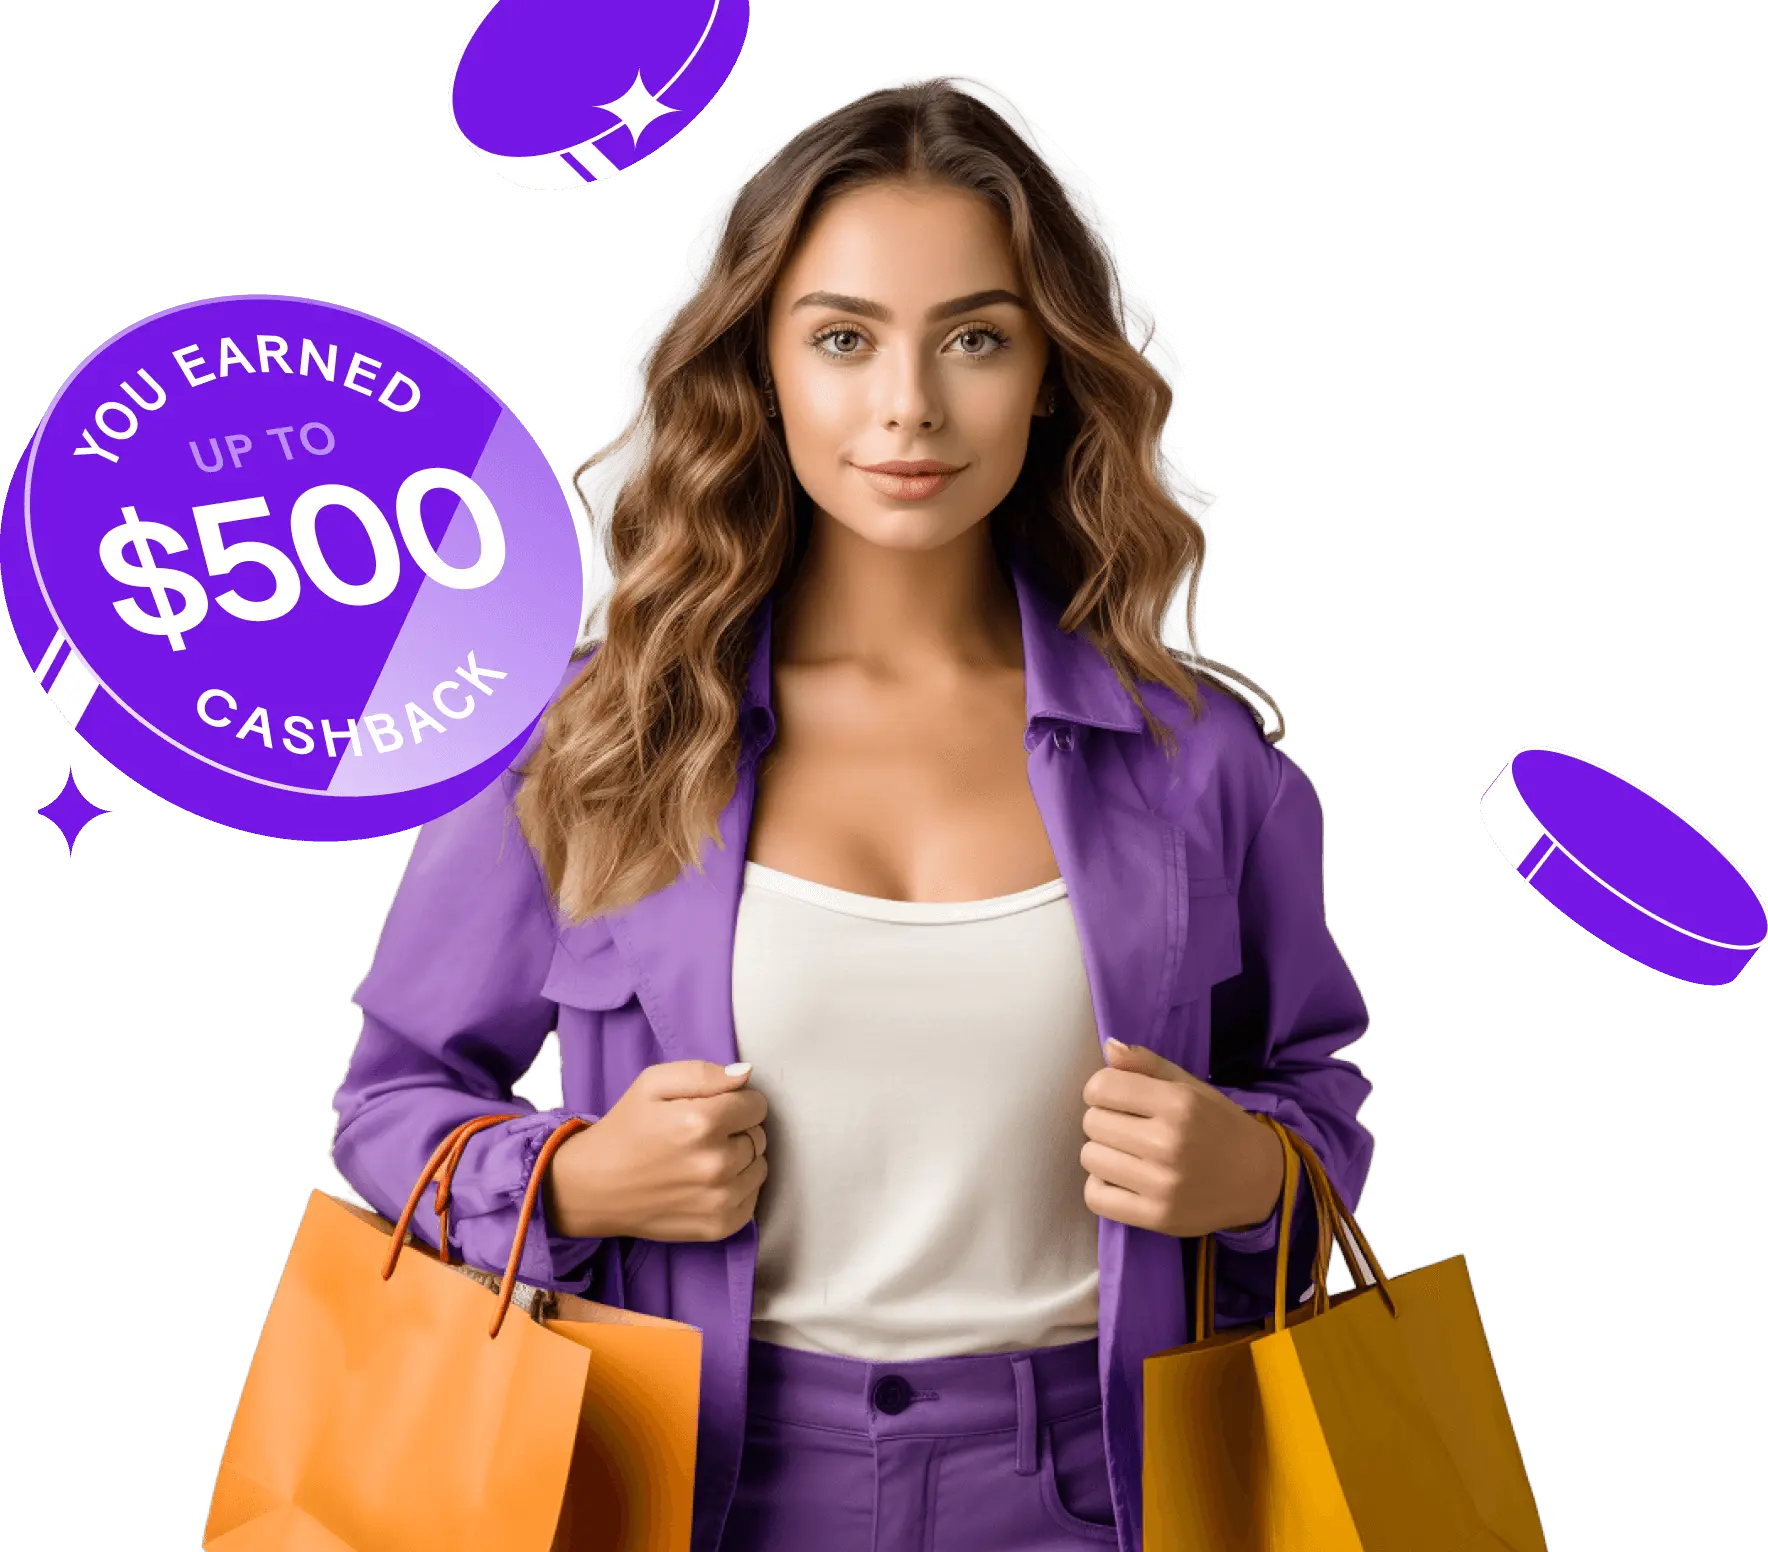 You earned up to $500 cashback